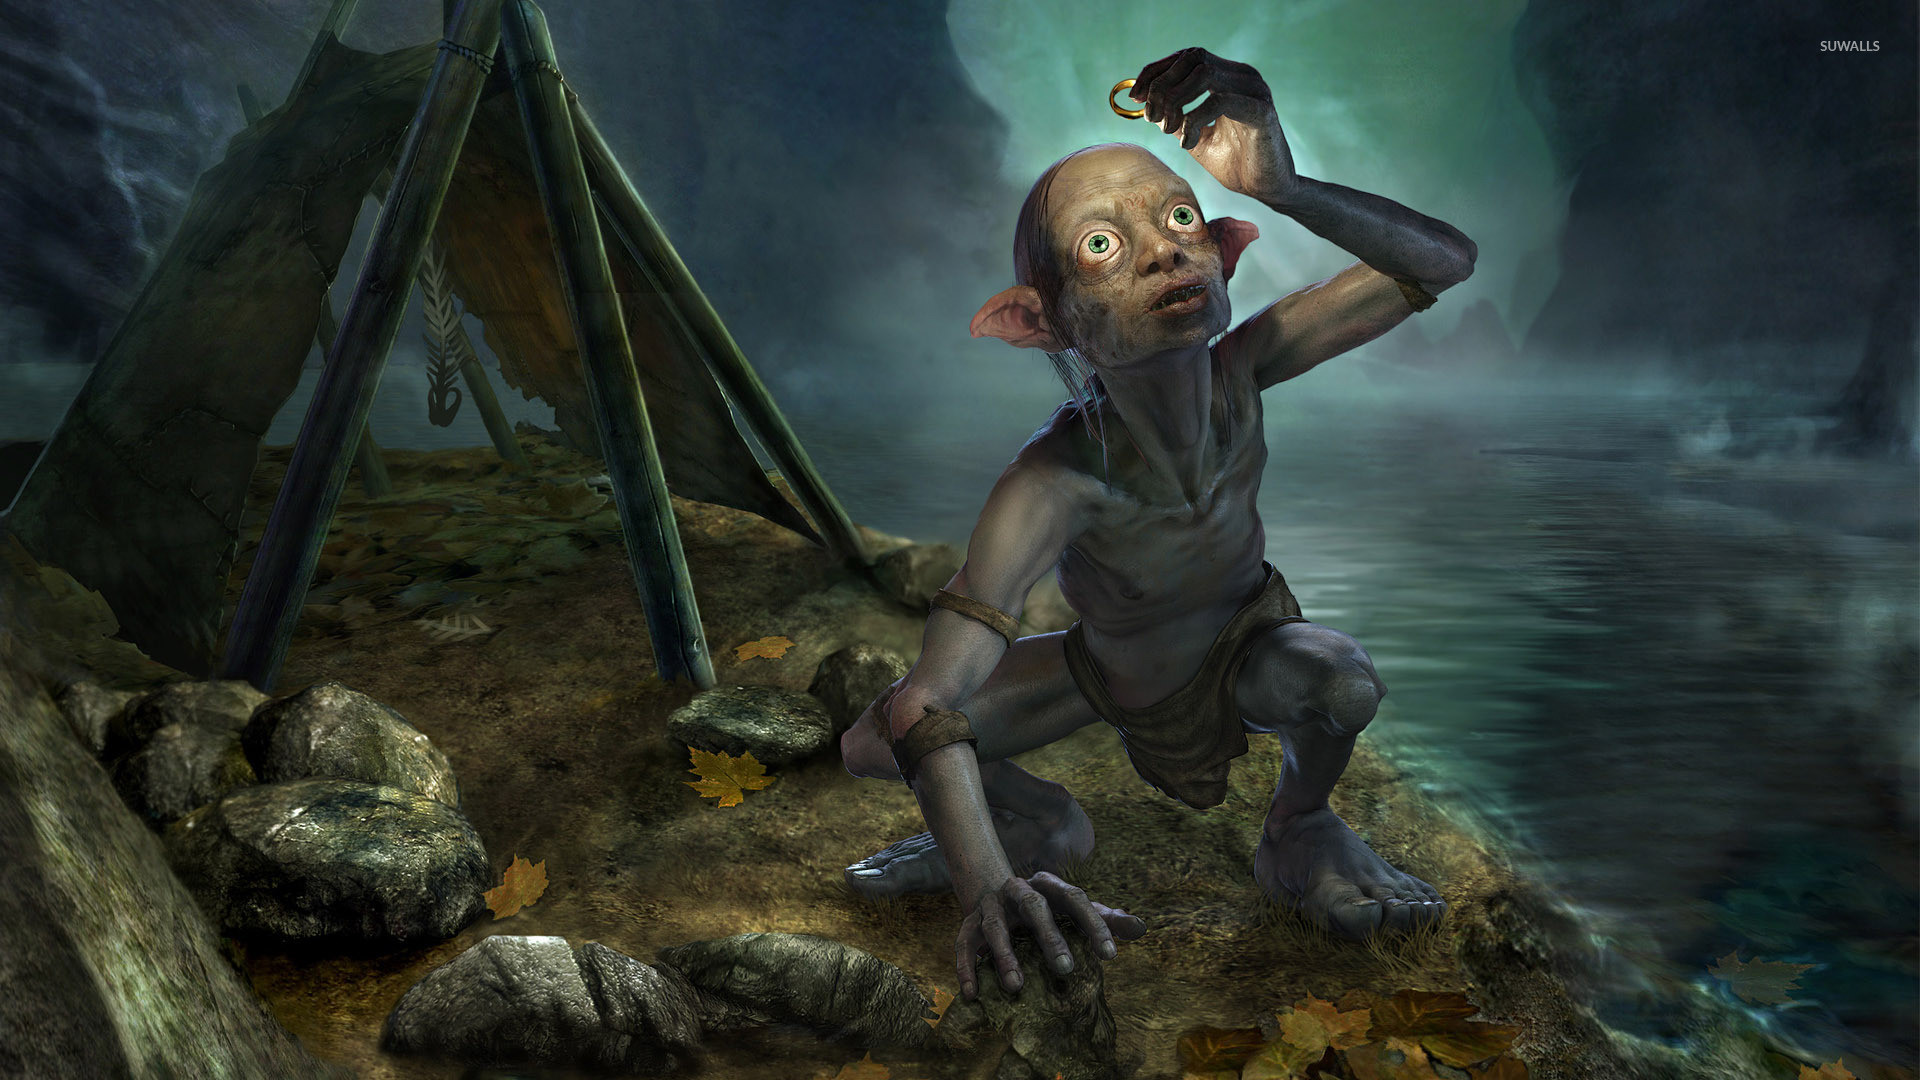 1920x1080 Gollum holding One Ring - The Lord of the Rings wallpaper